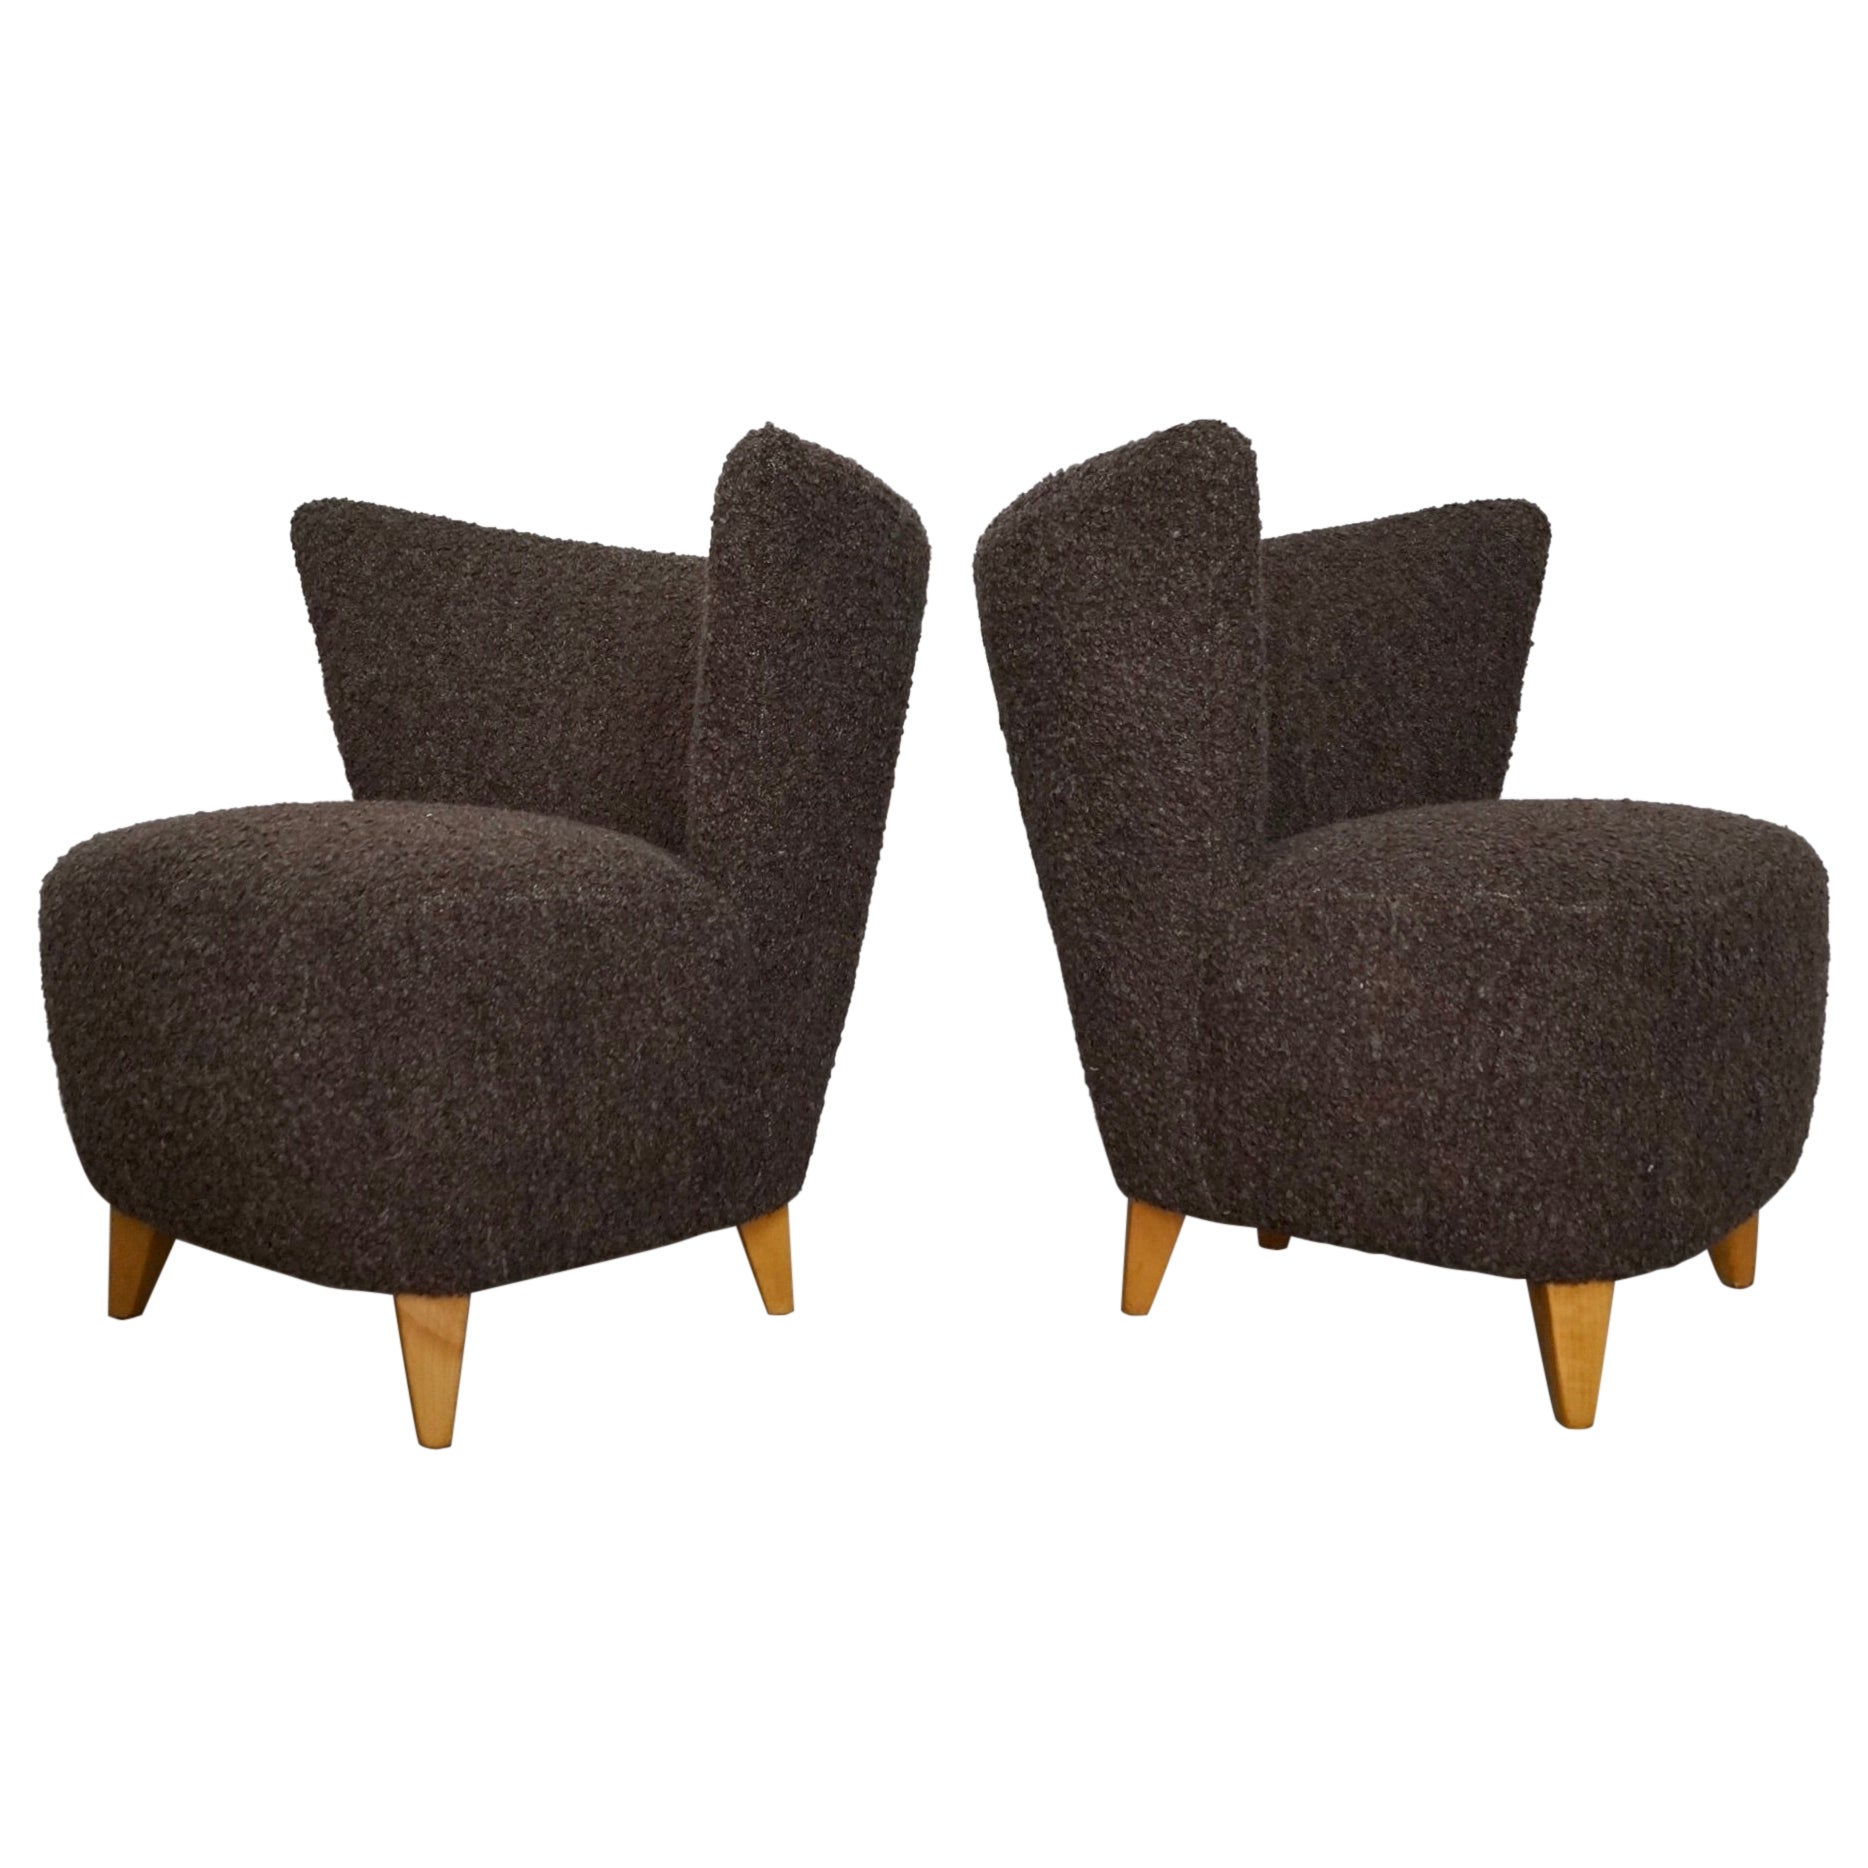 Pair of 1940's Art Deco Wingback Lounge Chairs Reupholstered in Belgic Wool For Sale